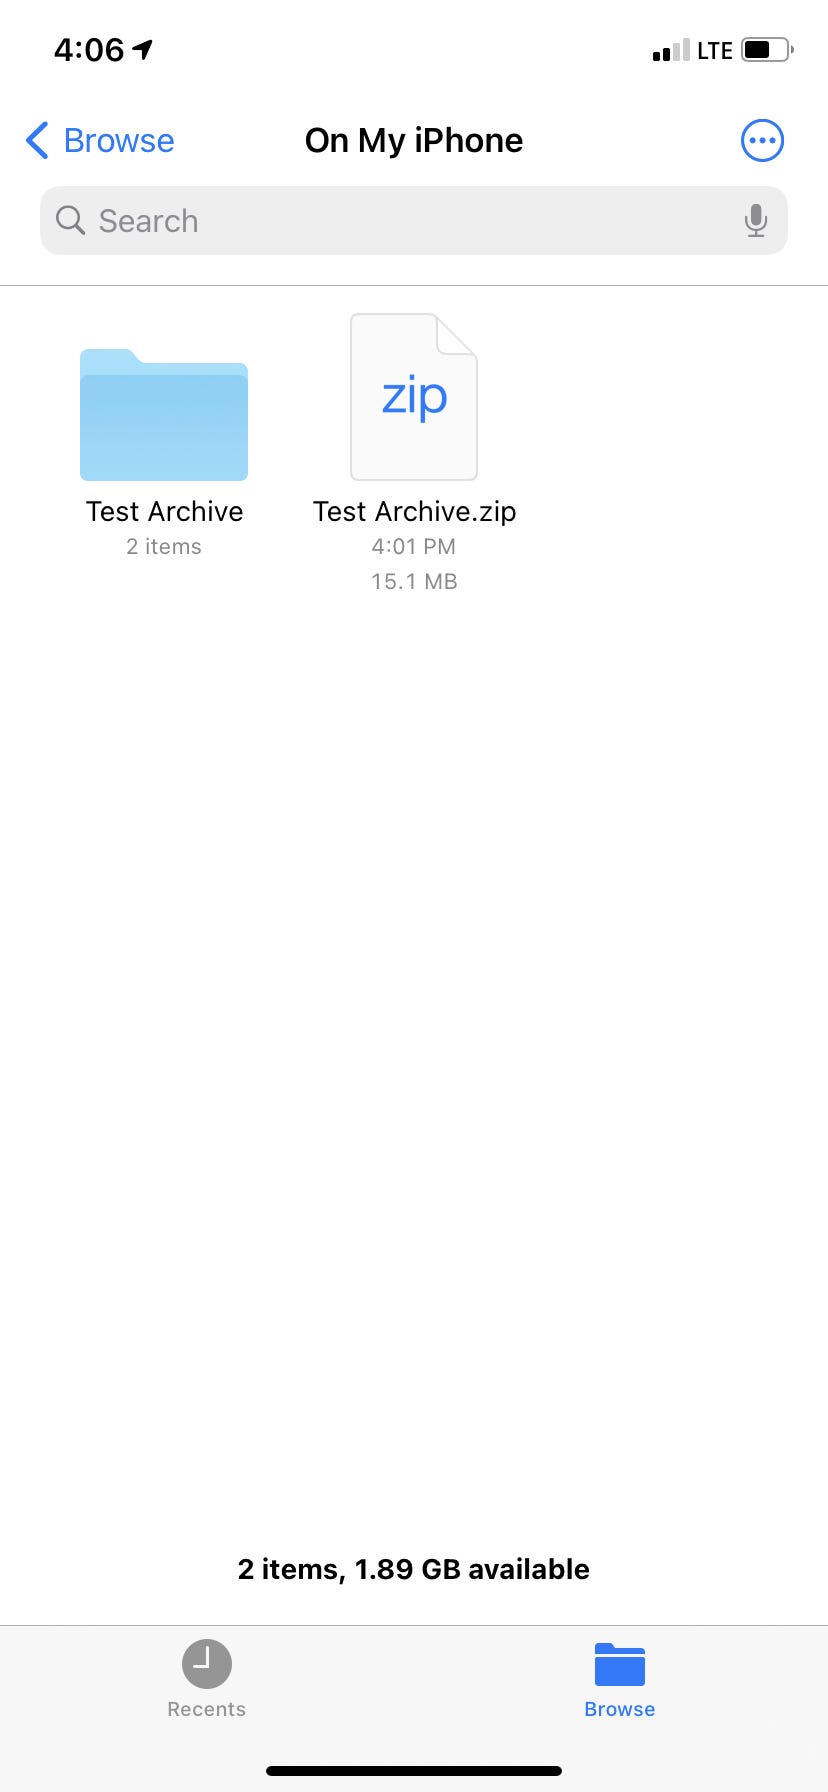 The iPhone files app with two files shown, one of which is a ZIP file called "Test Archive," and the other of which is an unzipped file also called "Test Archive."